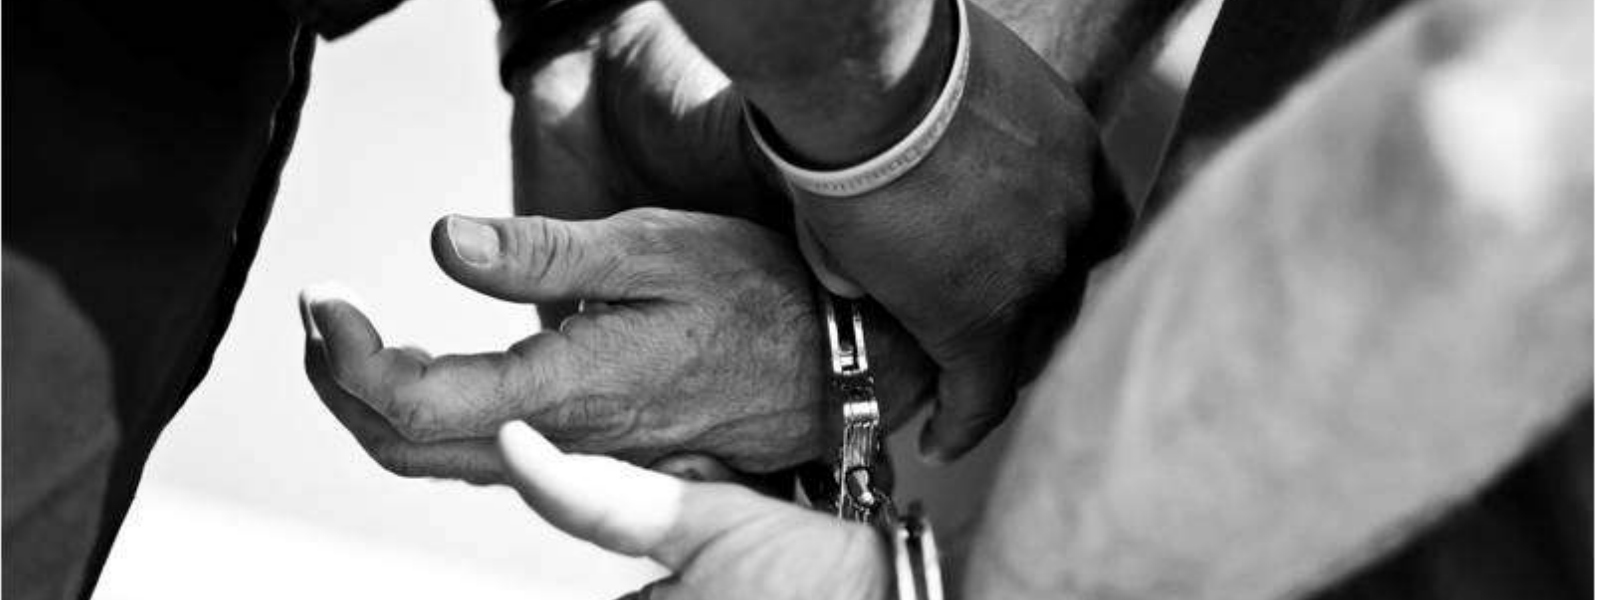 12 illegal immigrants arrested in Chilaw